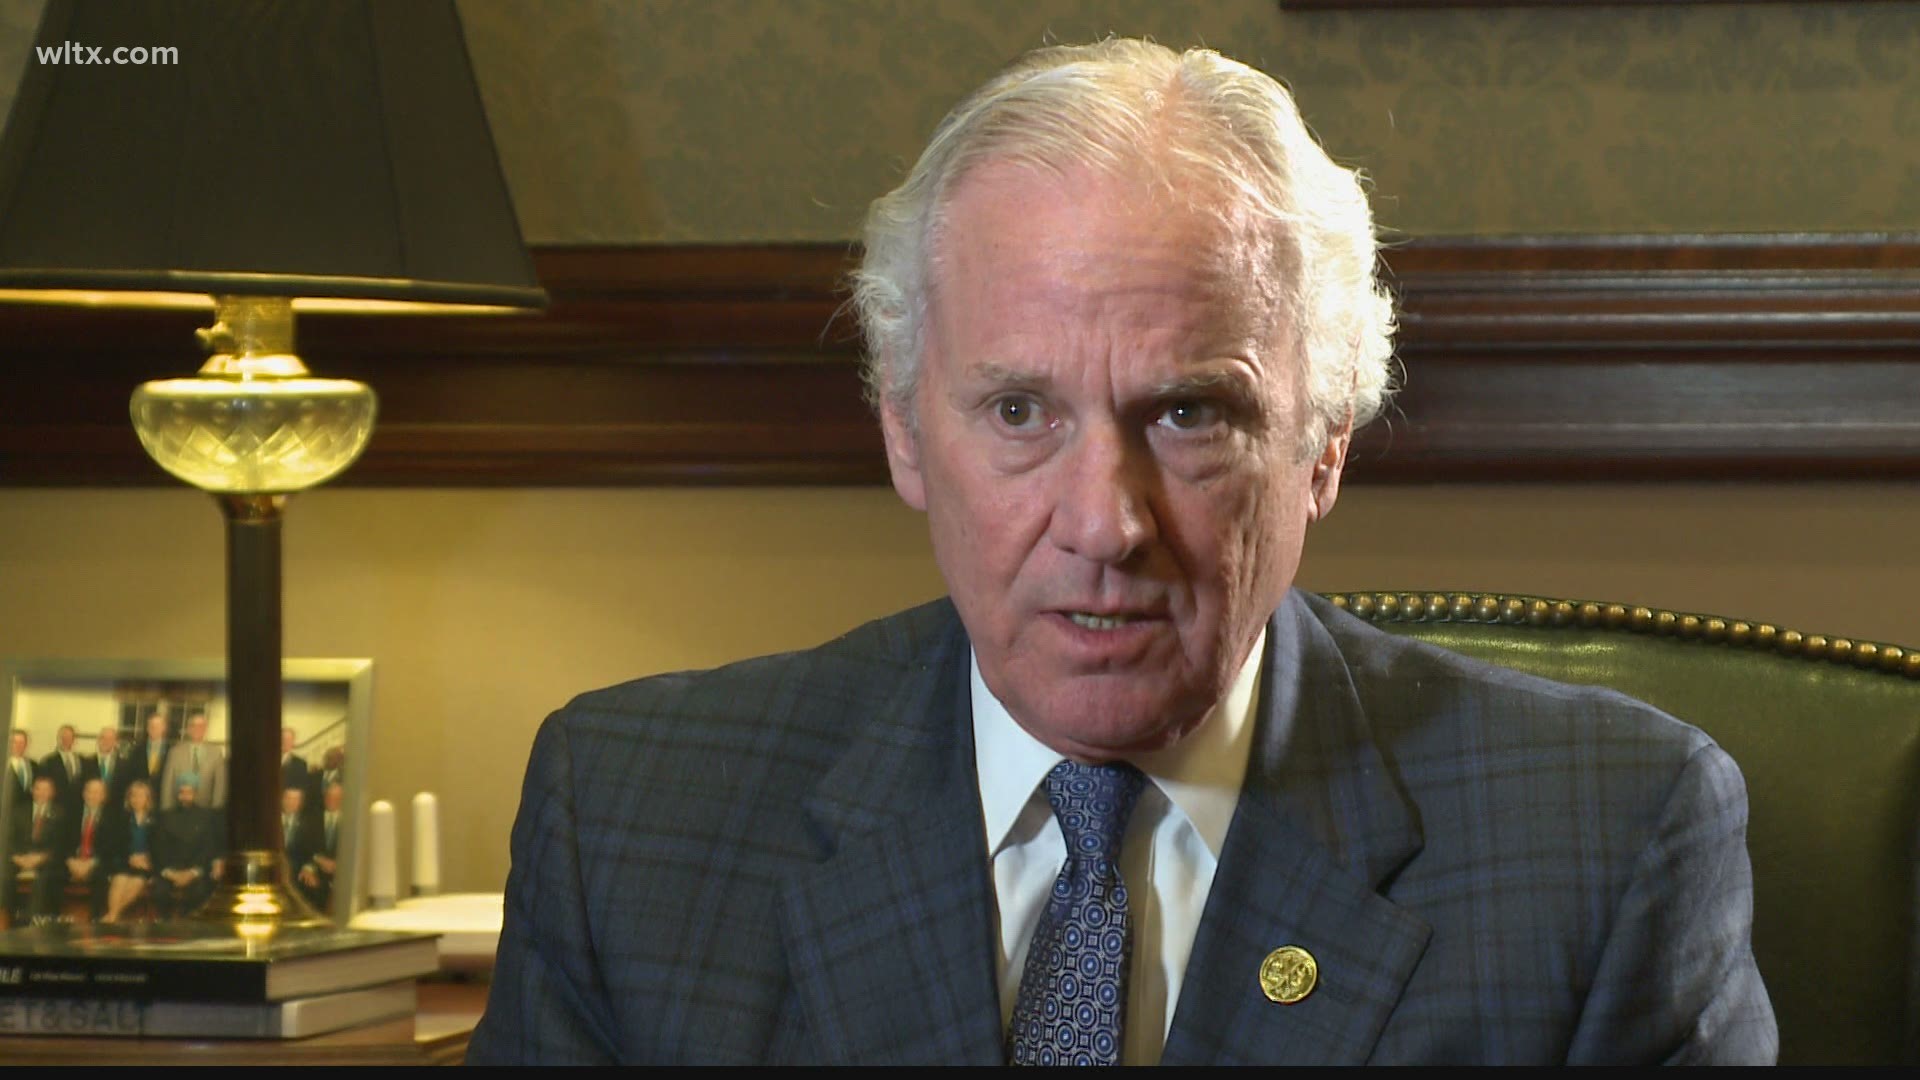 Gov. McMaster said it would be wrong to take vaccines away from those who are most vulnerable.